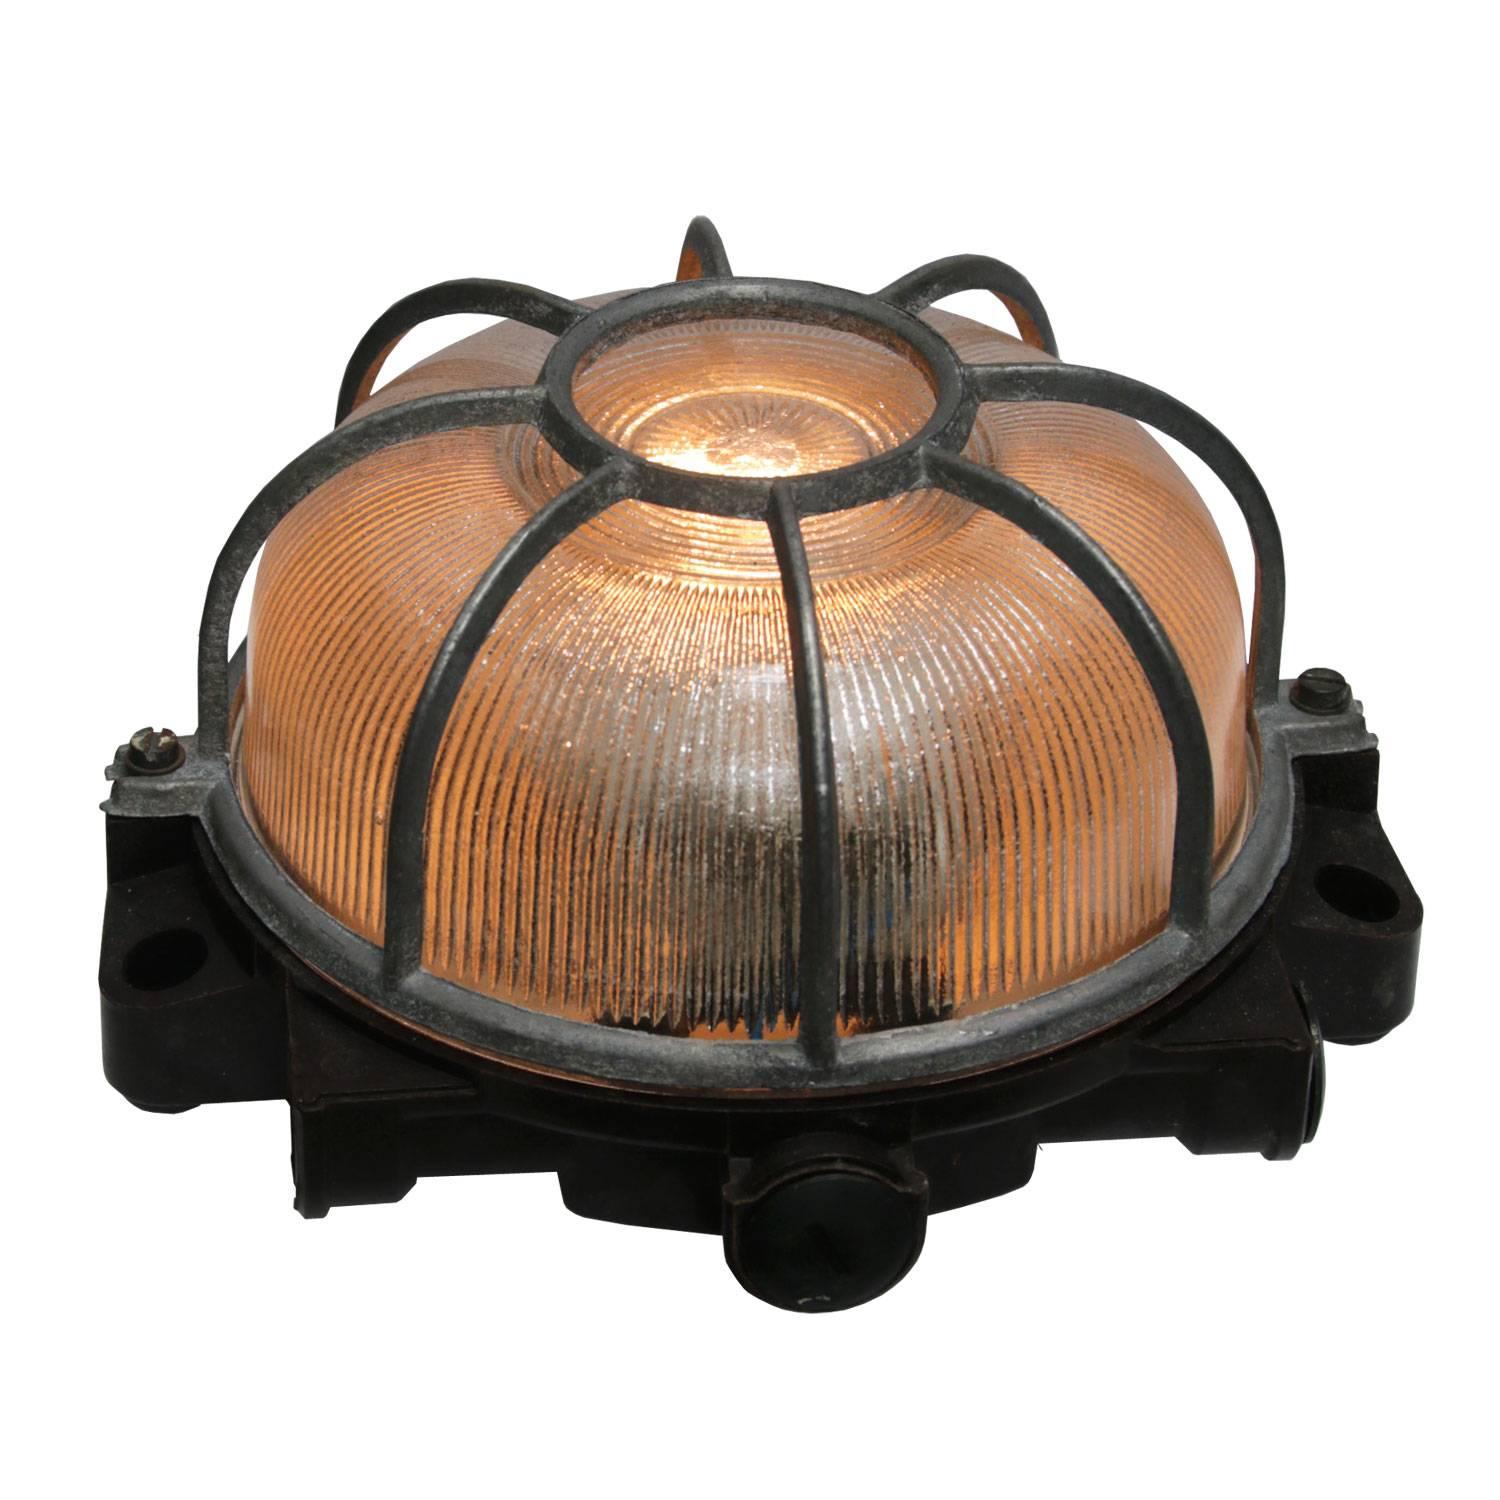 Industrial wall and ceiling scone. Bakelite back. Holophane striped glass.
Aluminium frame.

Weight 1.0 kg / 2.2 lb

Priced individual item. All lamps have been made suitable by international standards for incandescent light bulbs,